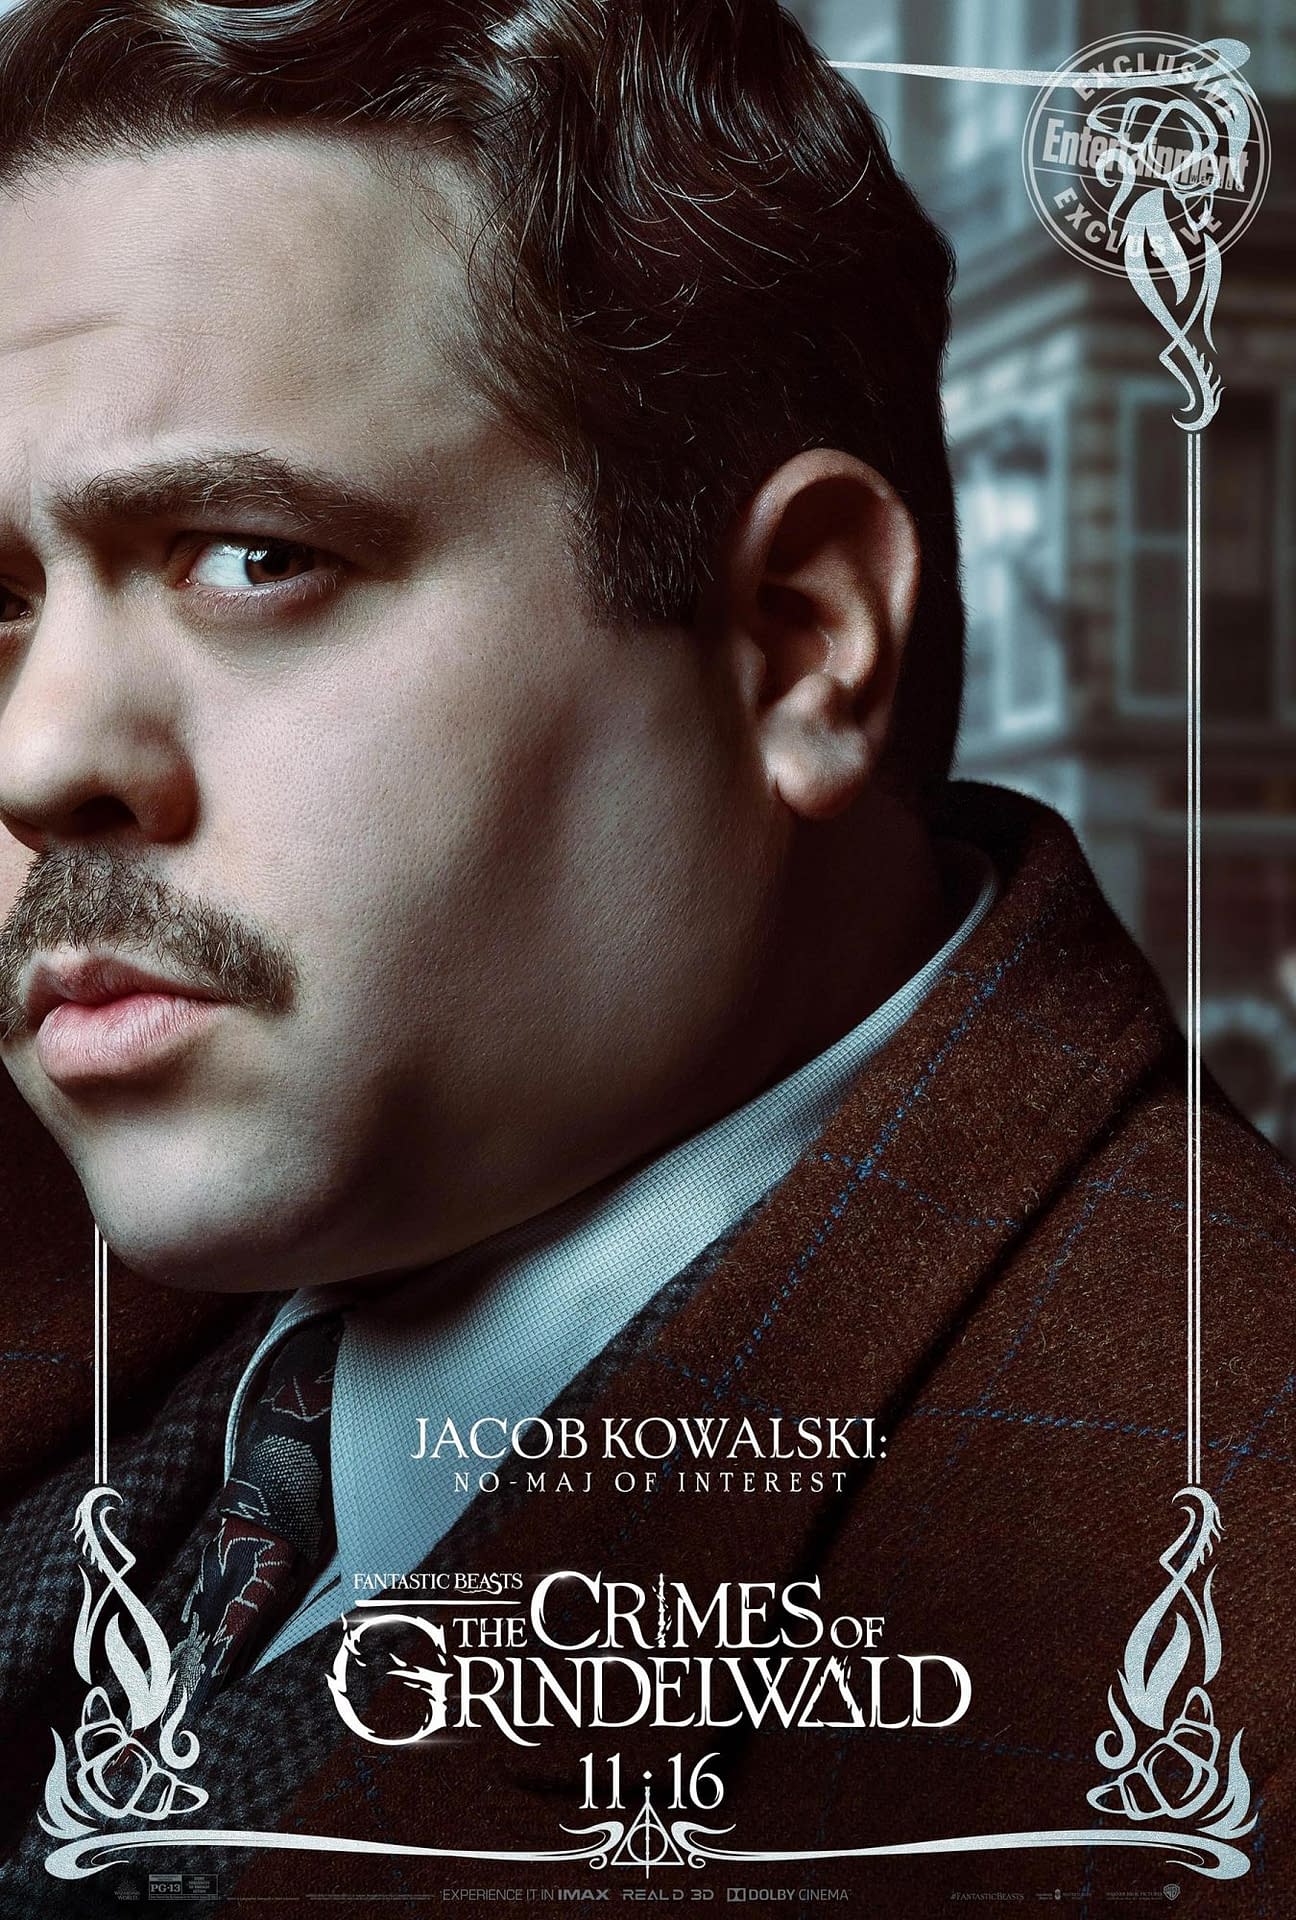 9 New Character Posters for Fantastic Beasts: The Crimes of Gindelwald